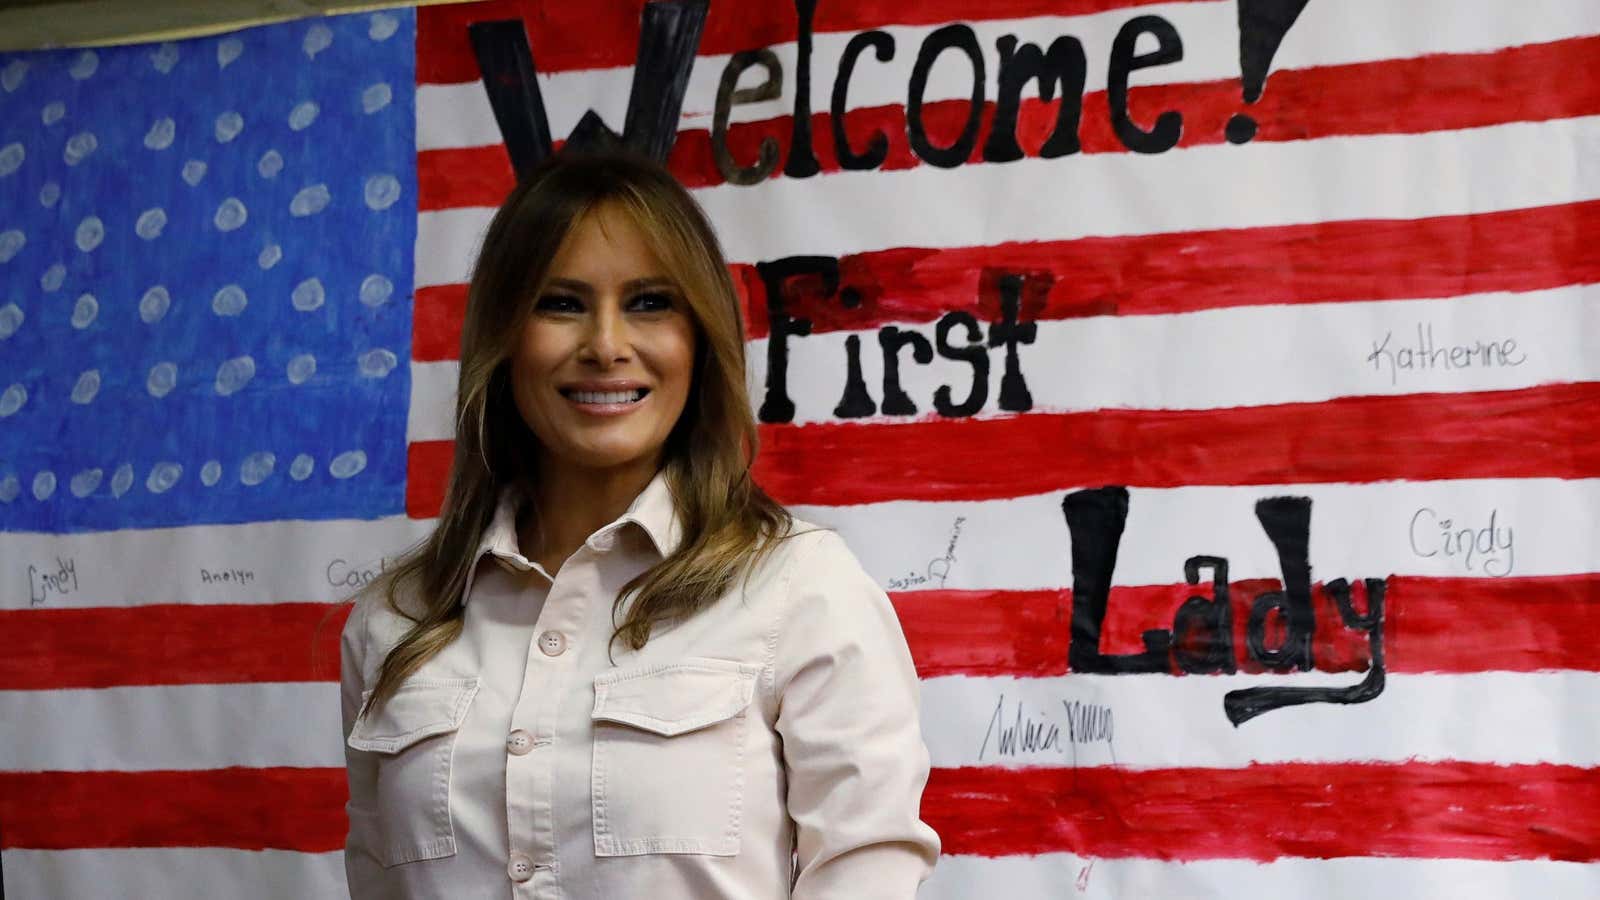 U.S. first lady Melania Trump poses in front of a U.S. flag after touring the Lutheran Social Services of the South “Upbring New Hope Children’s Center”